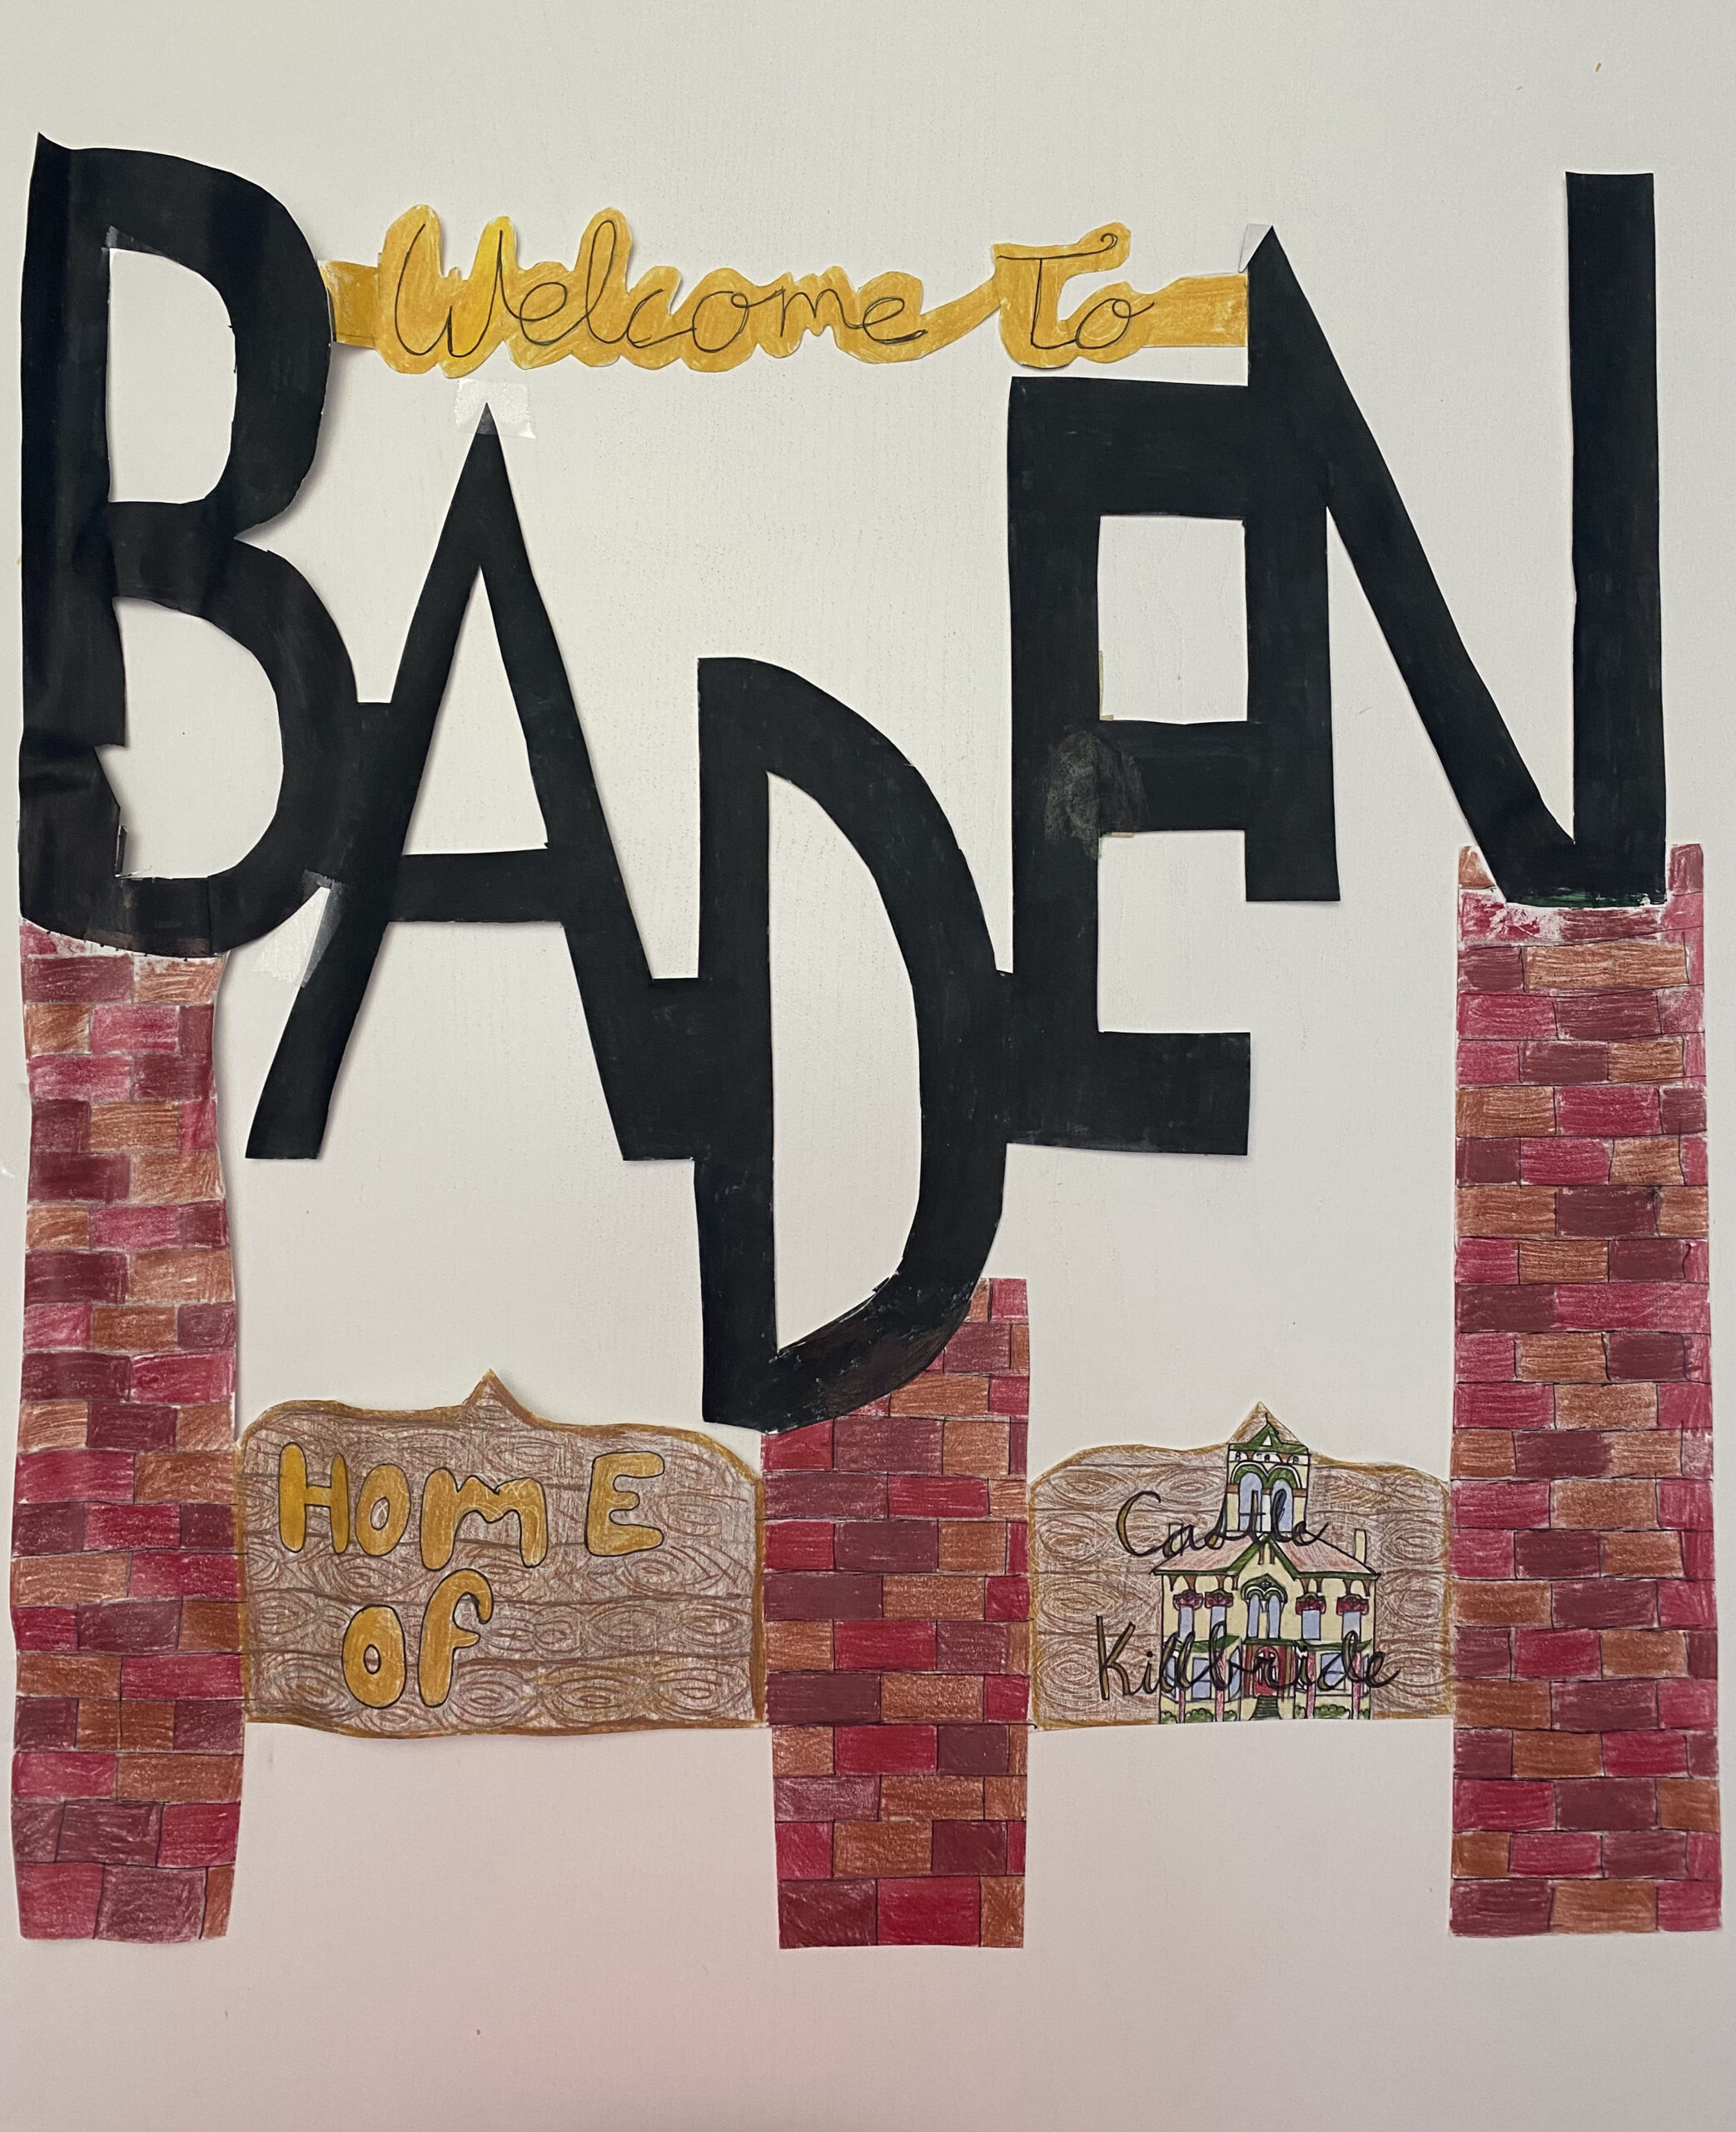 welcome to Baden sign by Ali